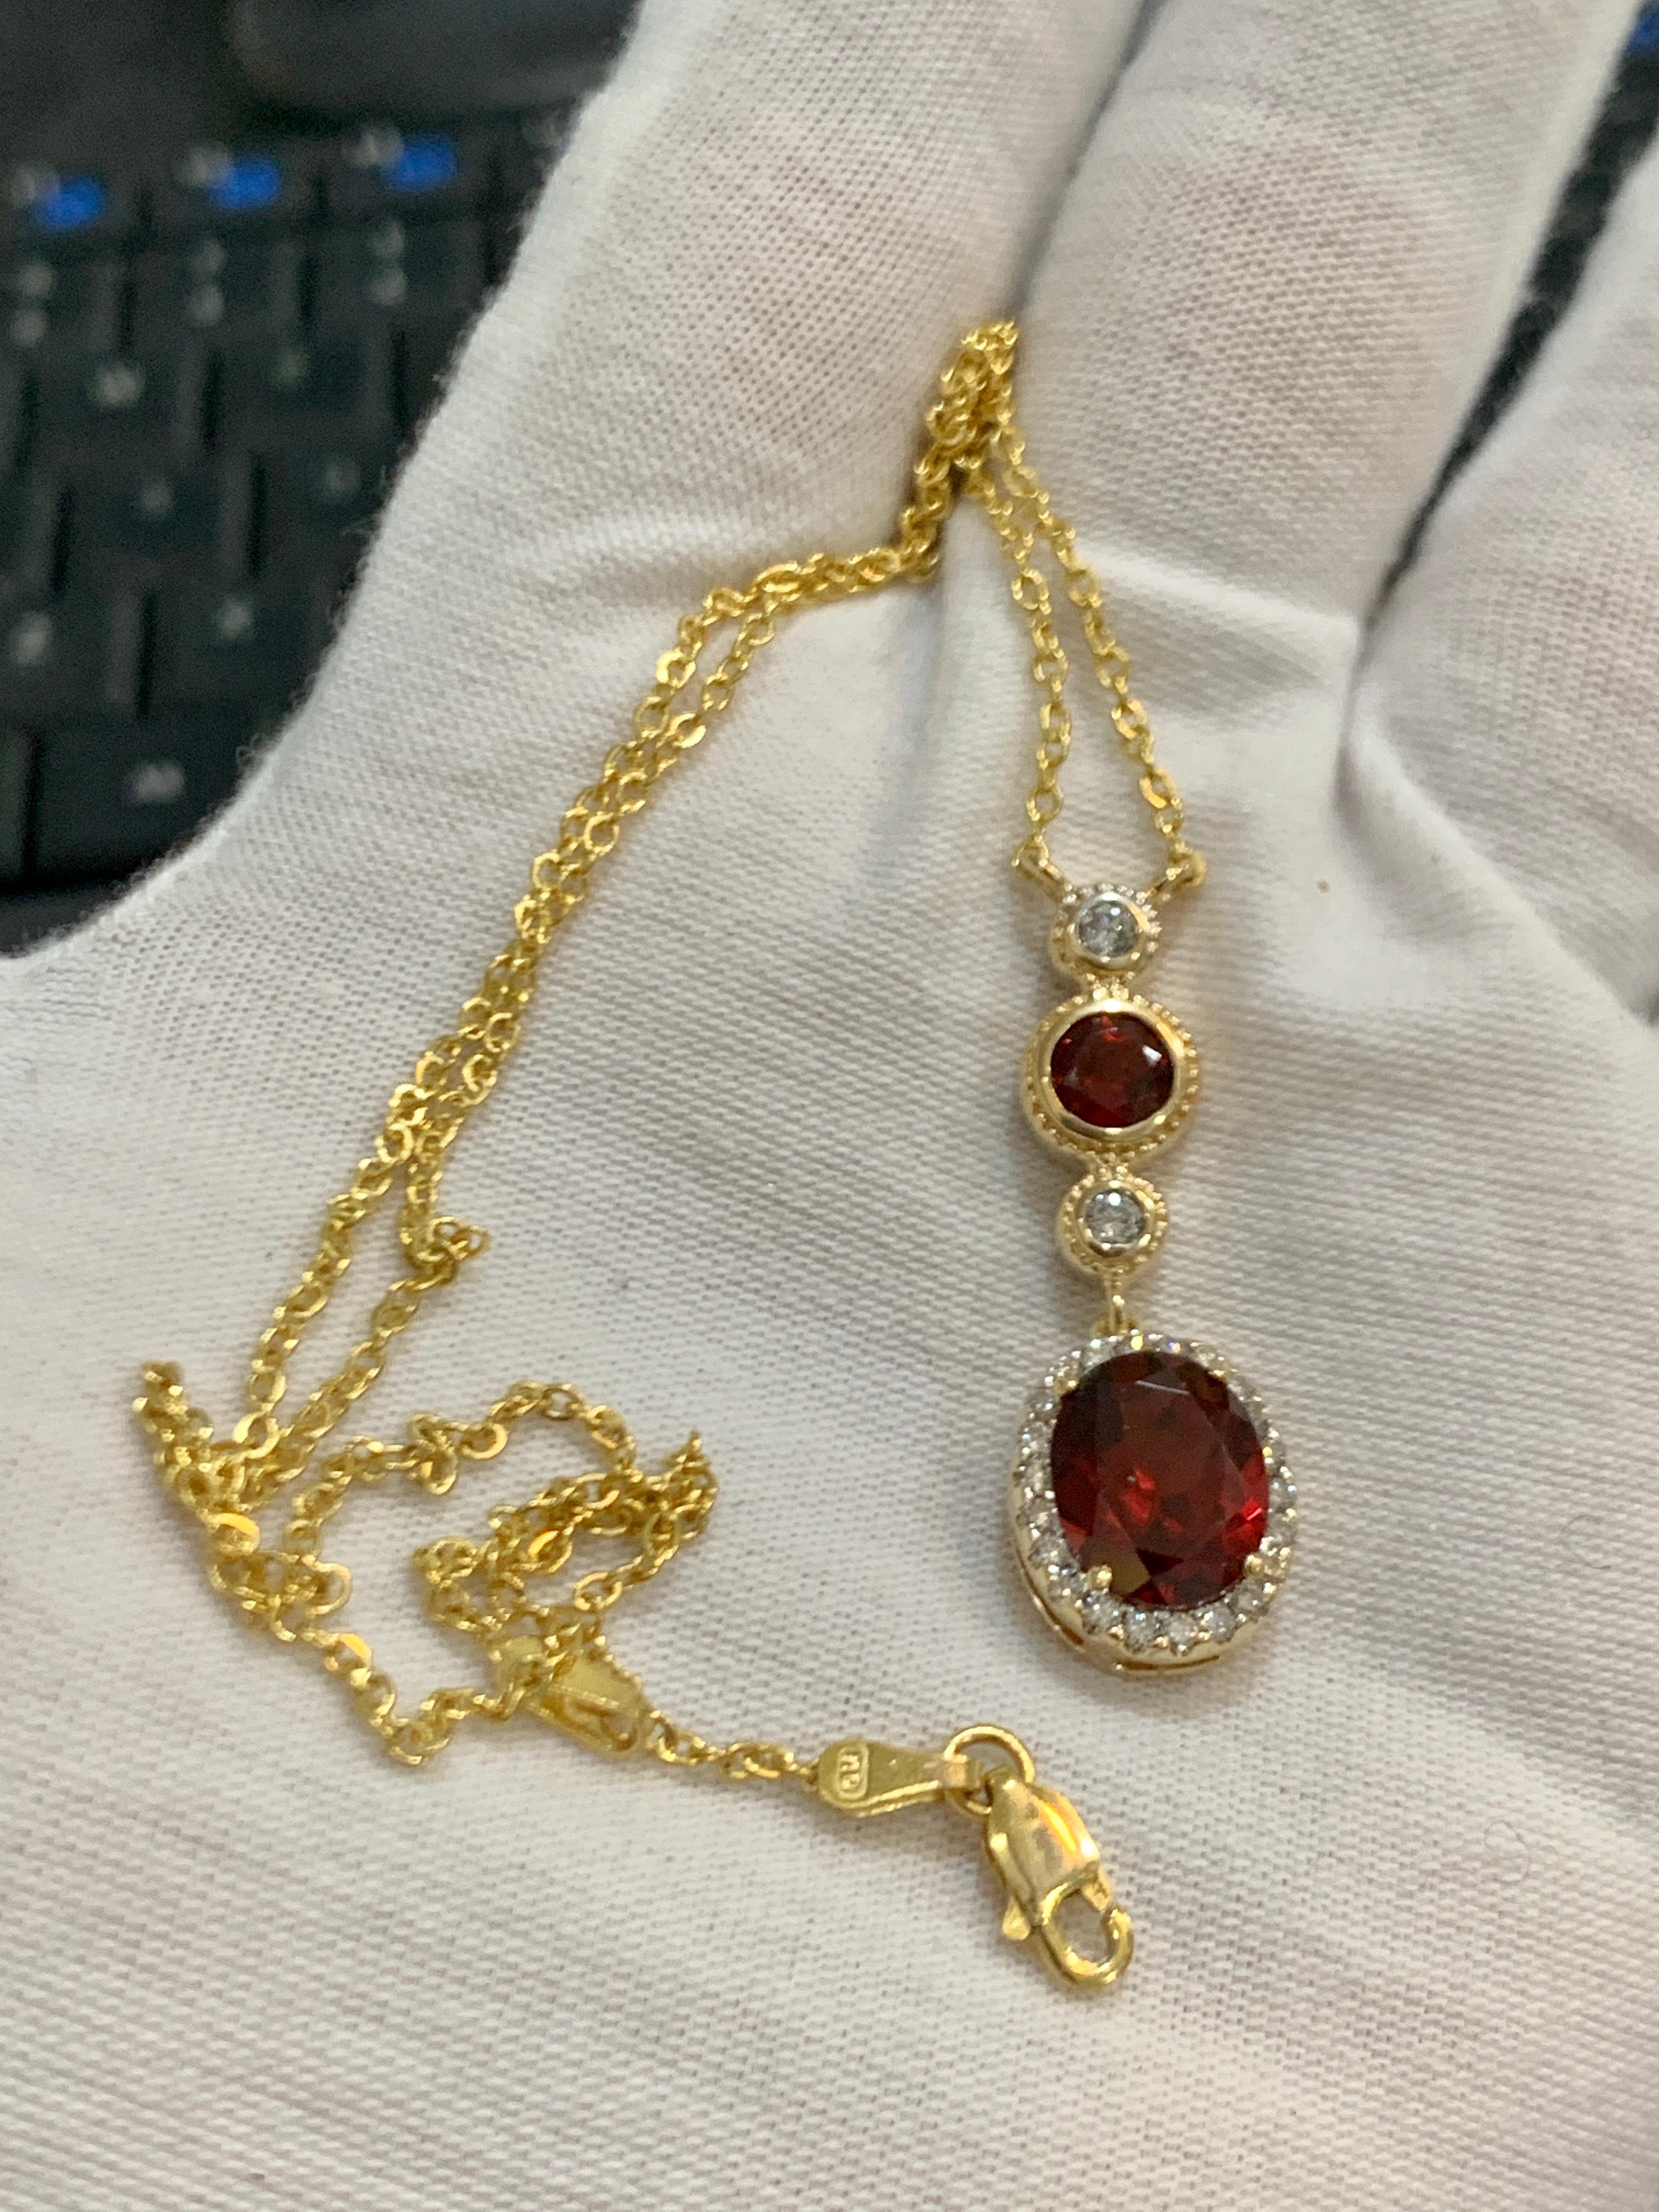 6 Carat Oval Shape Garnet and 0.6 Carat Diamond Necklace in 14 Karat Yellow Gold For Sale 1